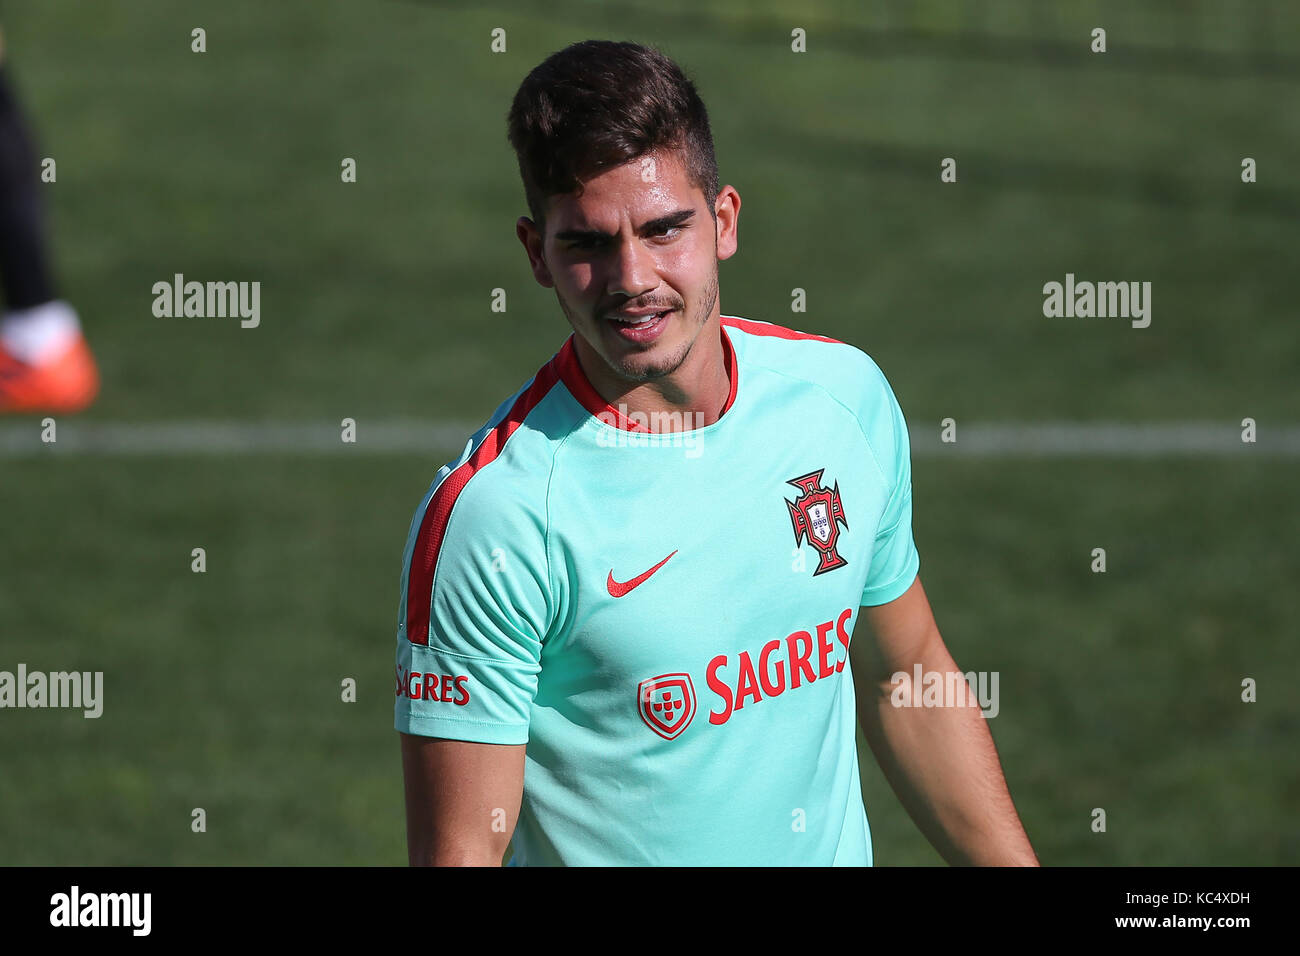 Lisbon, Portugal. 3rd Oct, 2017. Portugal's forward Andre Silva in action during the National Team Training session before the match between Portugal and Andorra at City Football in Oeiras, Lisbon on October 3, 2017. Credit: Bruno Barros/Alamy Live News Stock Photo